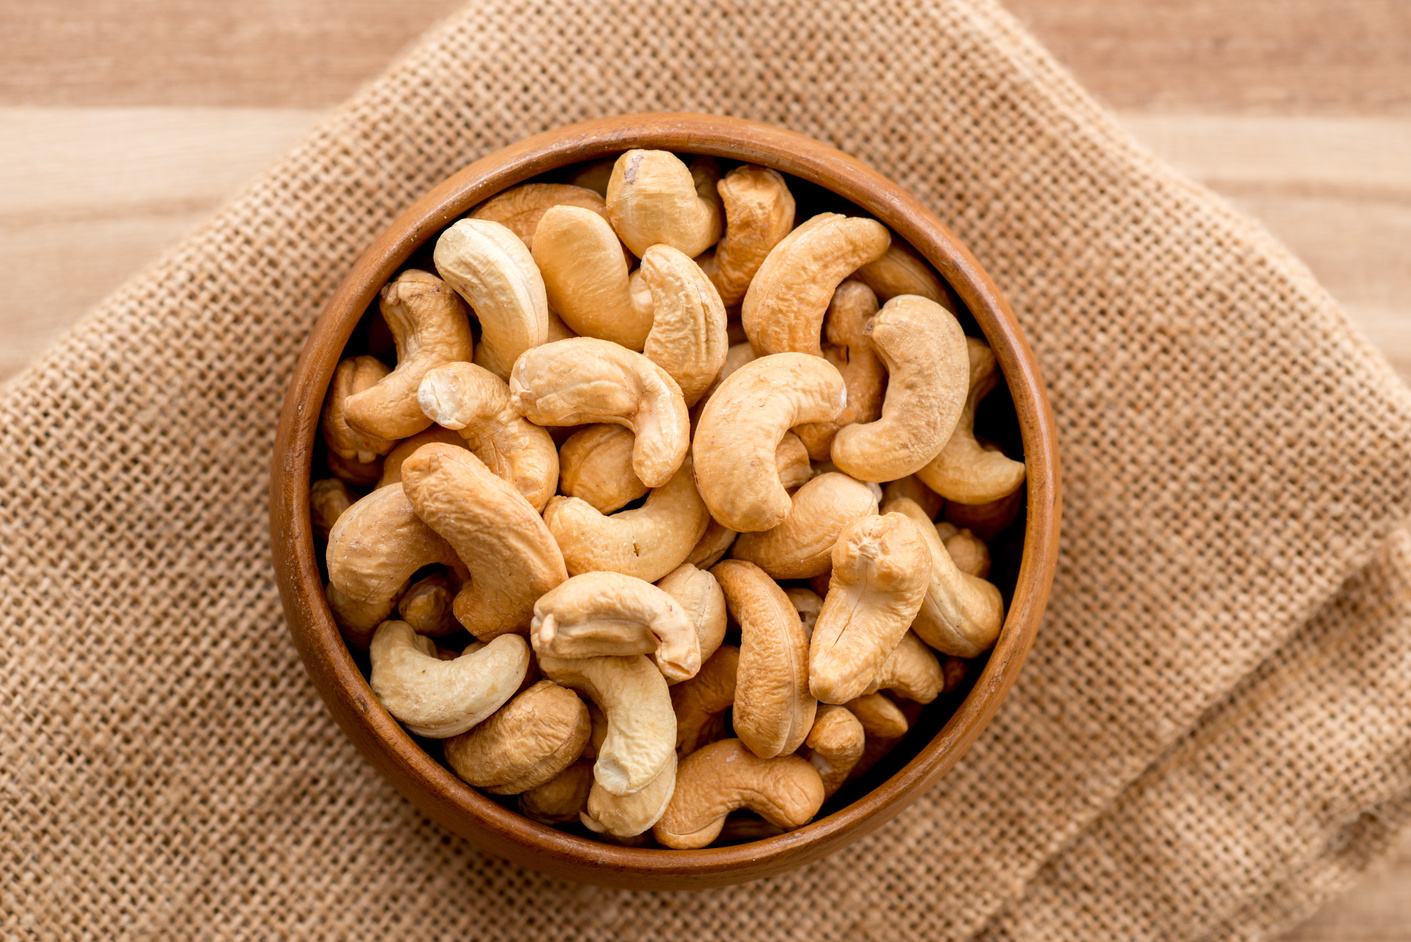 Roasted cashew nuts.